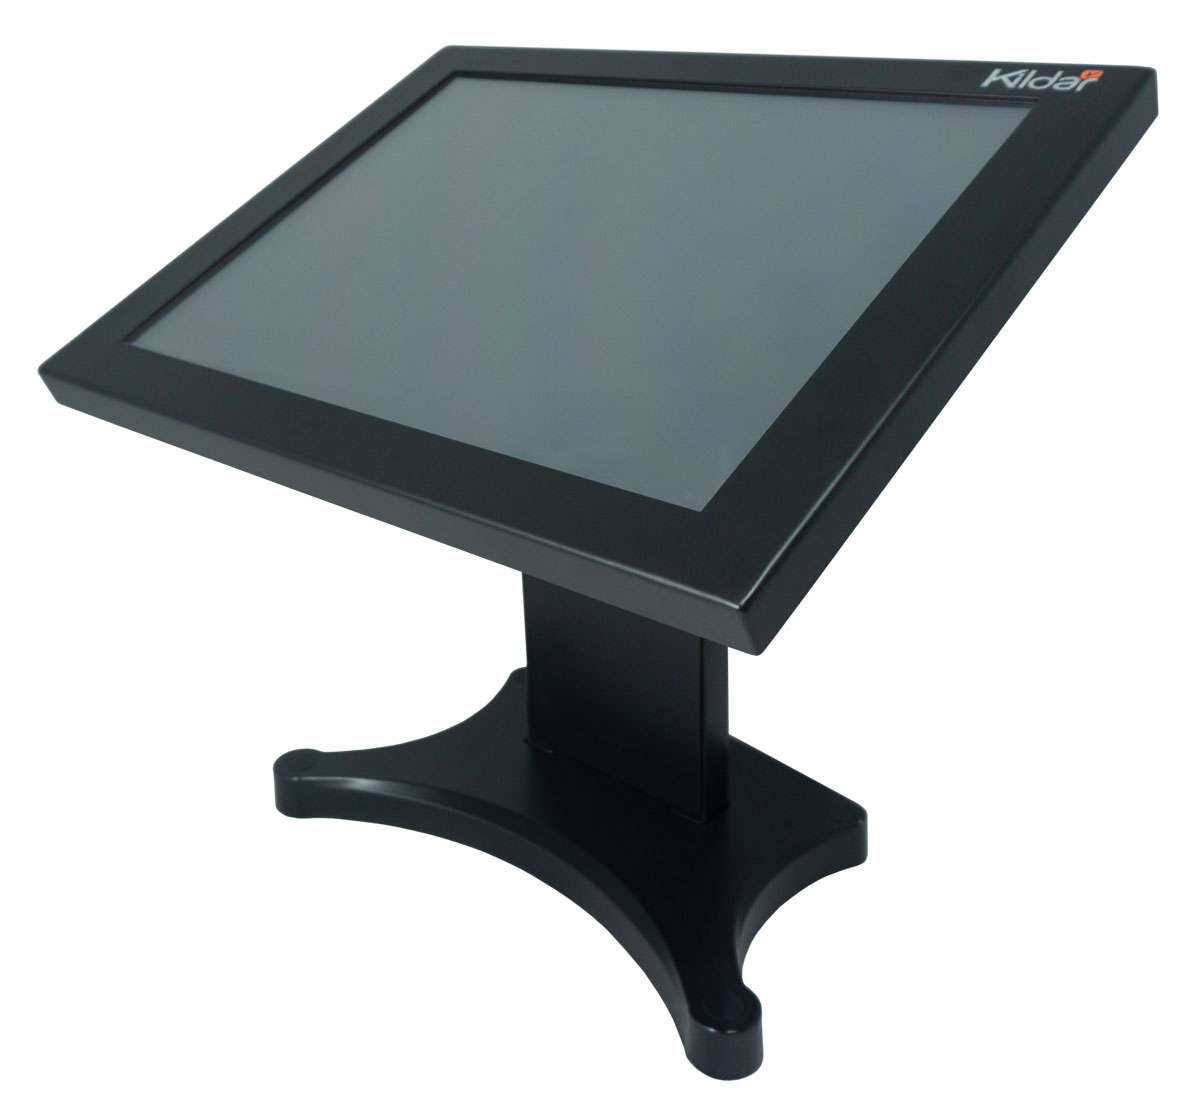 Kildar POS Touch screen Terminals DataTouch T1582